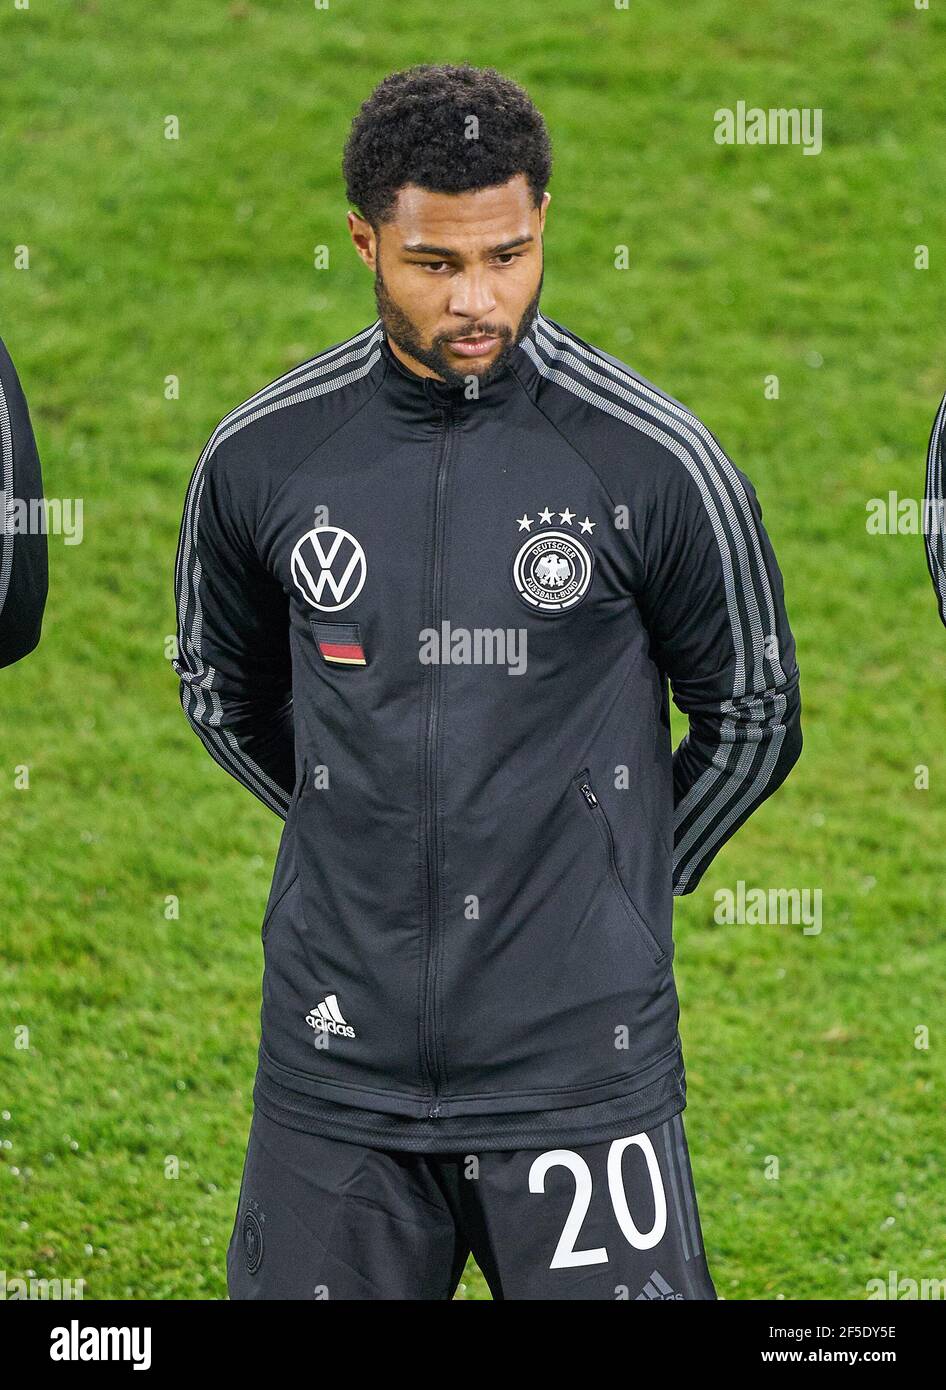 Serge GNABRY, DFB 20  half-size, portrait, one person, single, Aktion, Einzelbild, angeschnittenes Einzelmotiv, Halbfigur, halbe Figur,  in the match GERMANY - ICELAND 3-0 Deutschland - ISLAND 3-0 Qualification for World Championships, WM Quali, Season 2020/2021,  March 25, 2021  in Duisburg, Germany.  © Peter Schatz / Alamy Live News  Important: DFB regulations prohibit any use of photographs as image sequences and/or quasi-video. Stock Photo